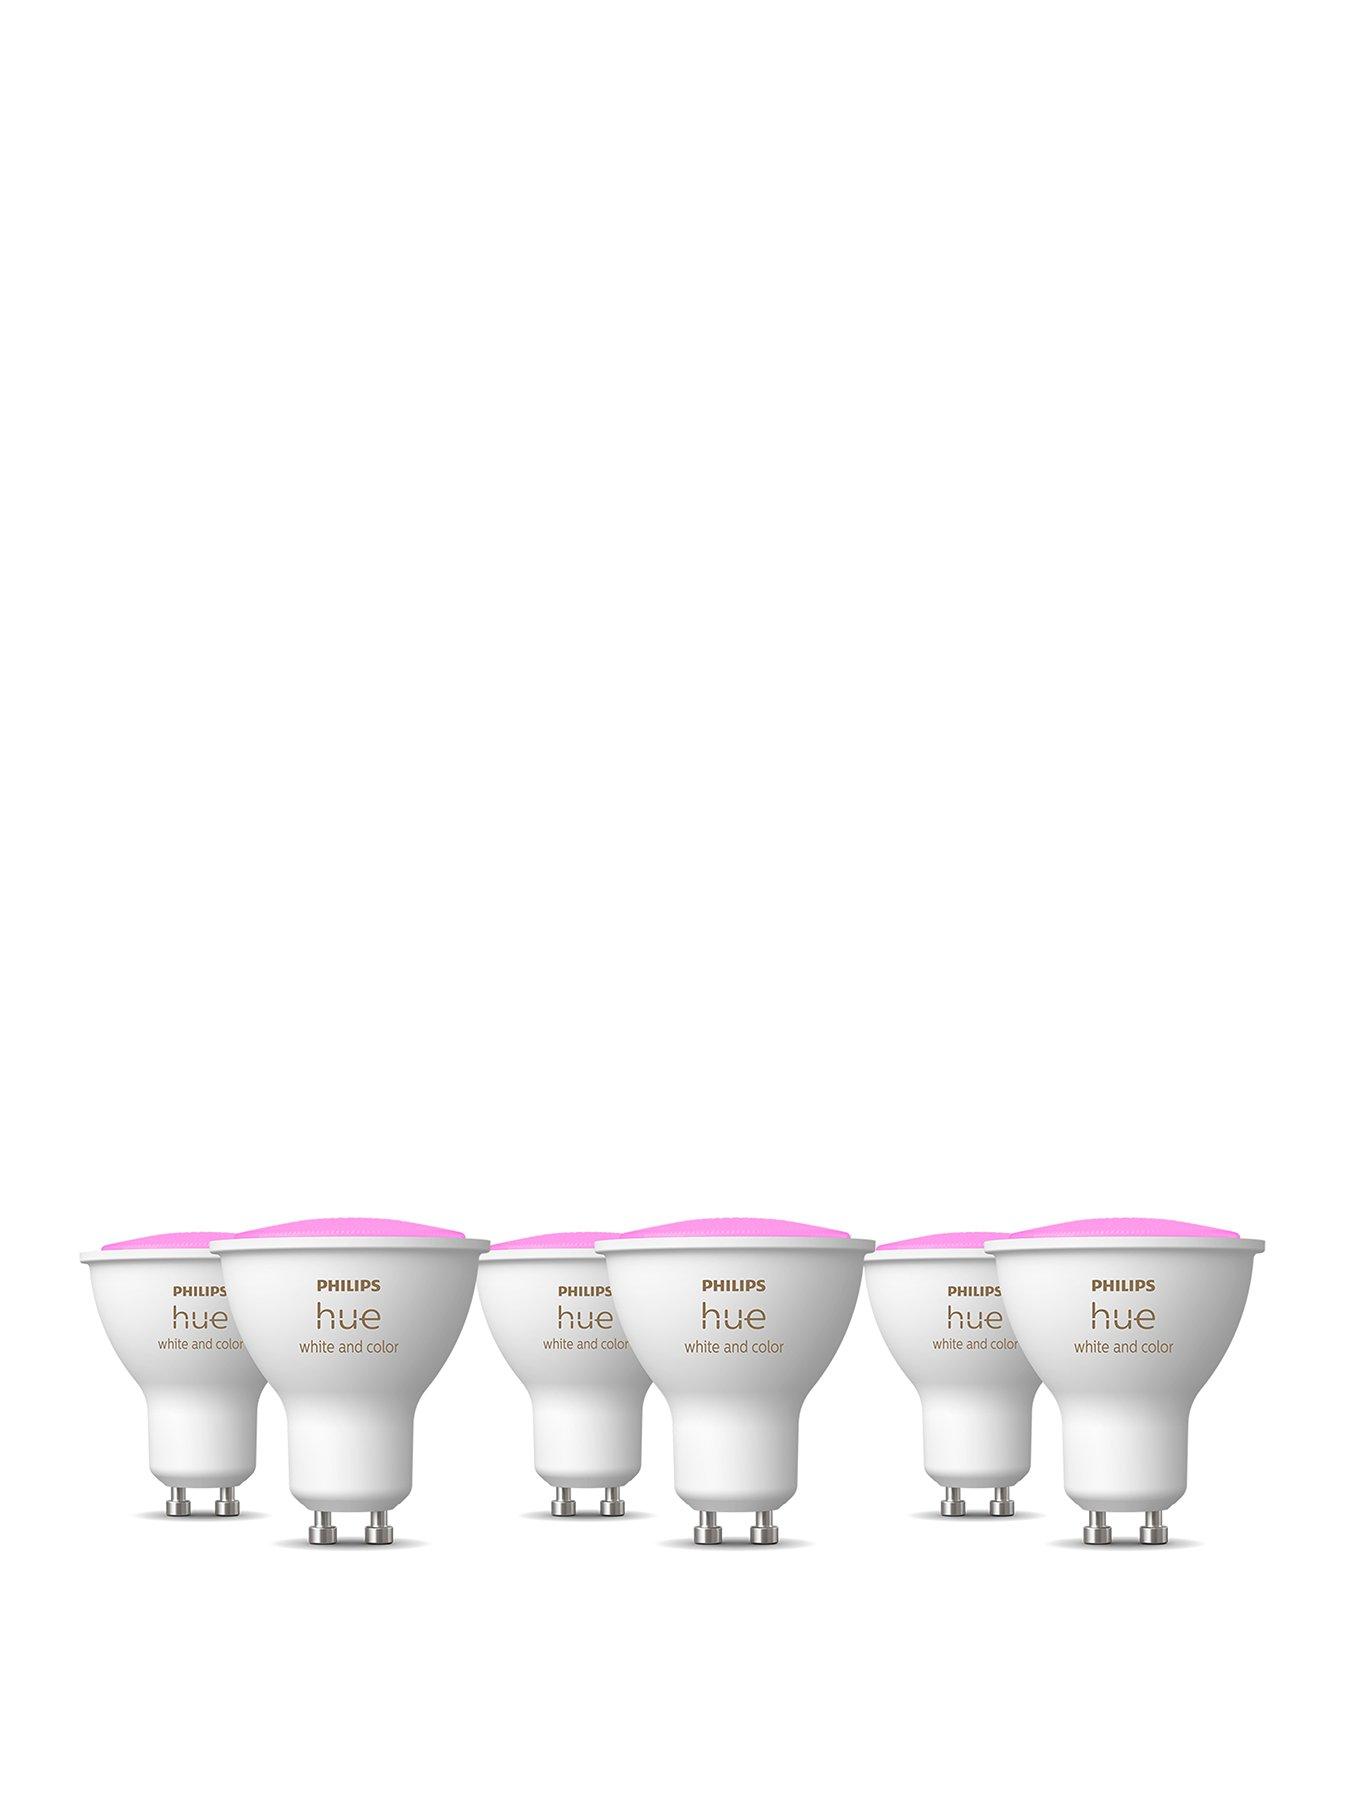 Hue White Ambiance 5W GU10 1-Pack BT, Smart Home Solution for Sleep